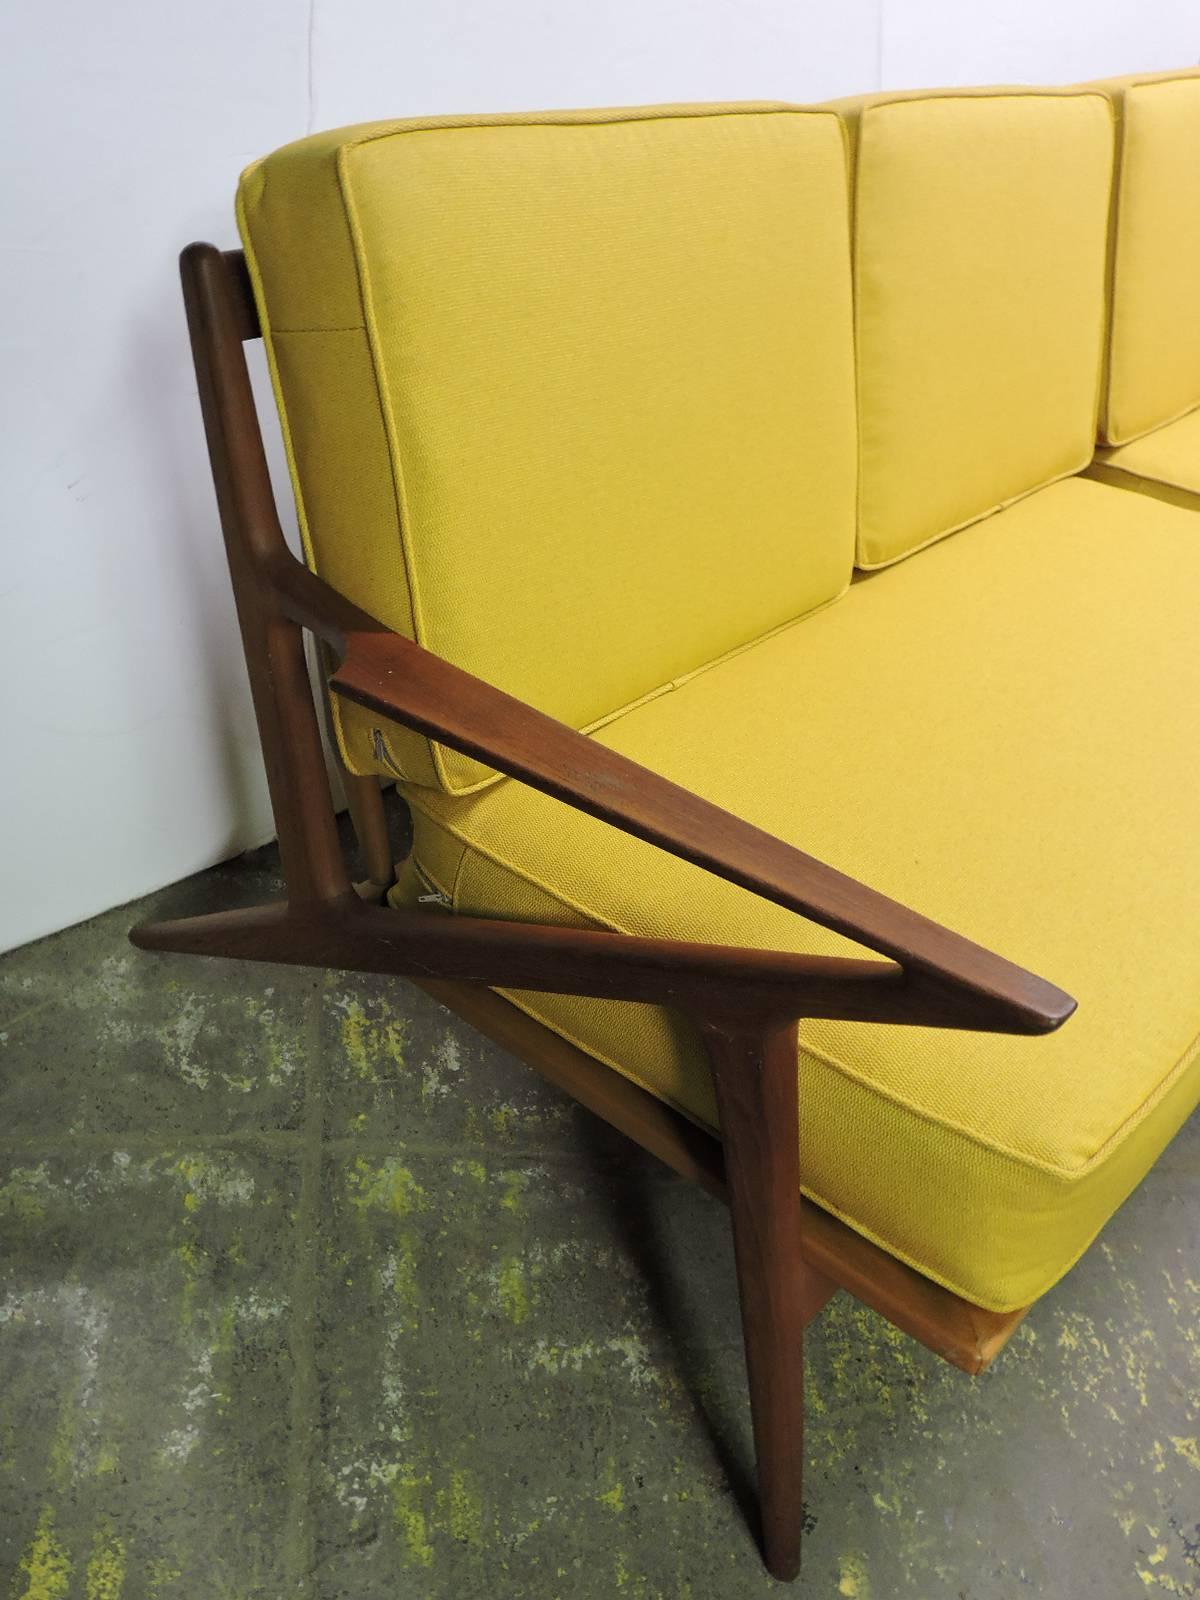 A rare two section Danish modern Z sofa designed by Poul Jensen for Selig with what appears to be the original factory brass bronze boomerang shaped brackets for added support where tapered legs are joined to frame ( see pictures) Just reupholstered